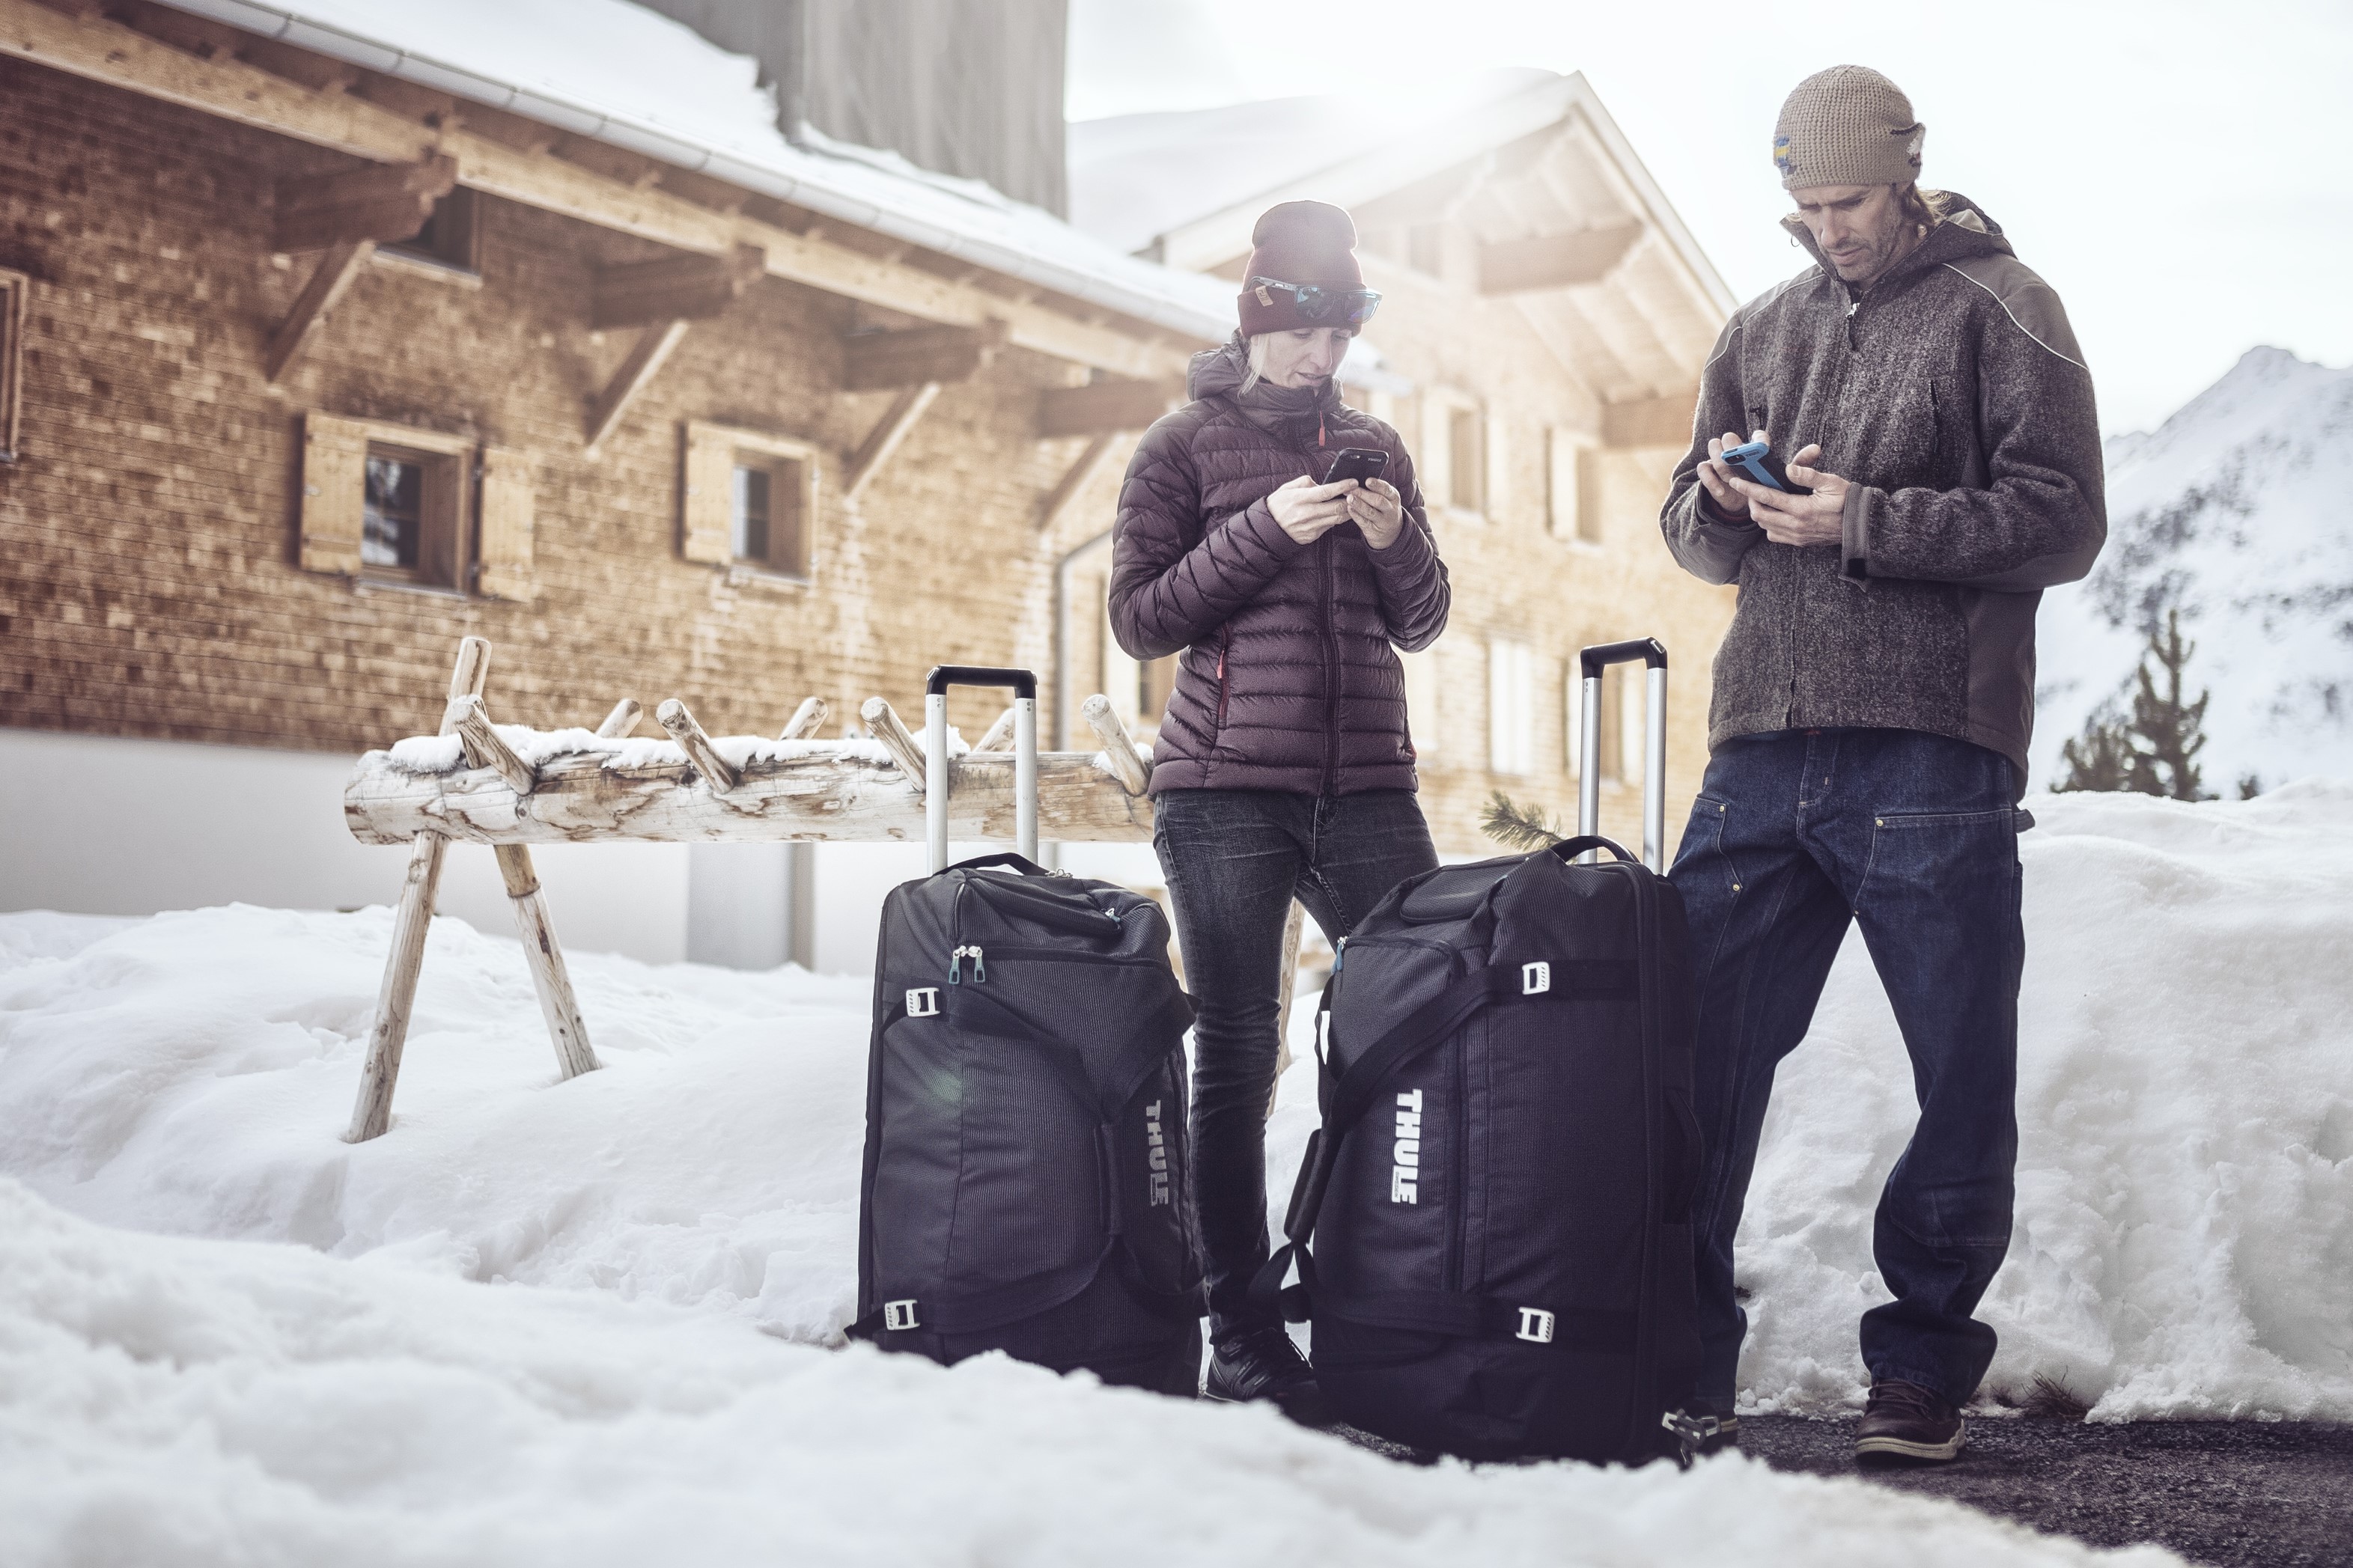 Thule Crossover 2 luggage bags